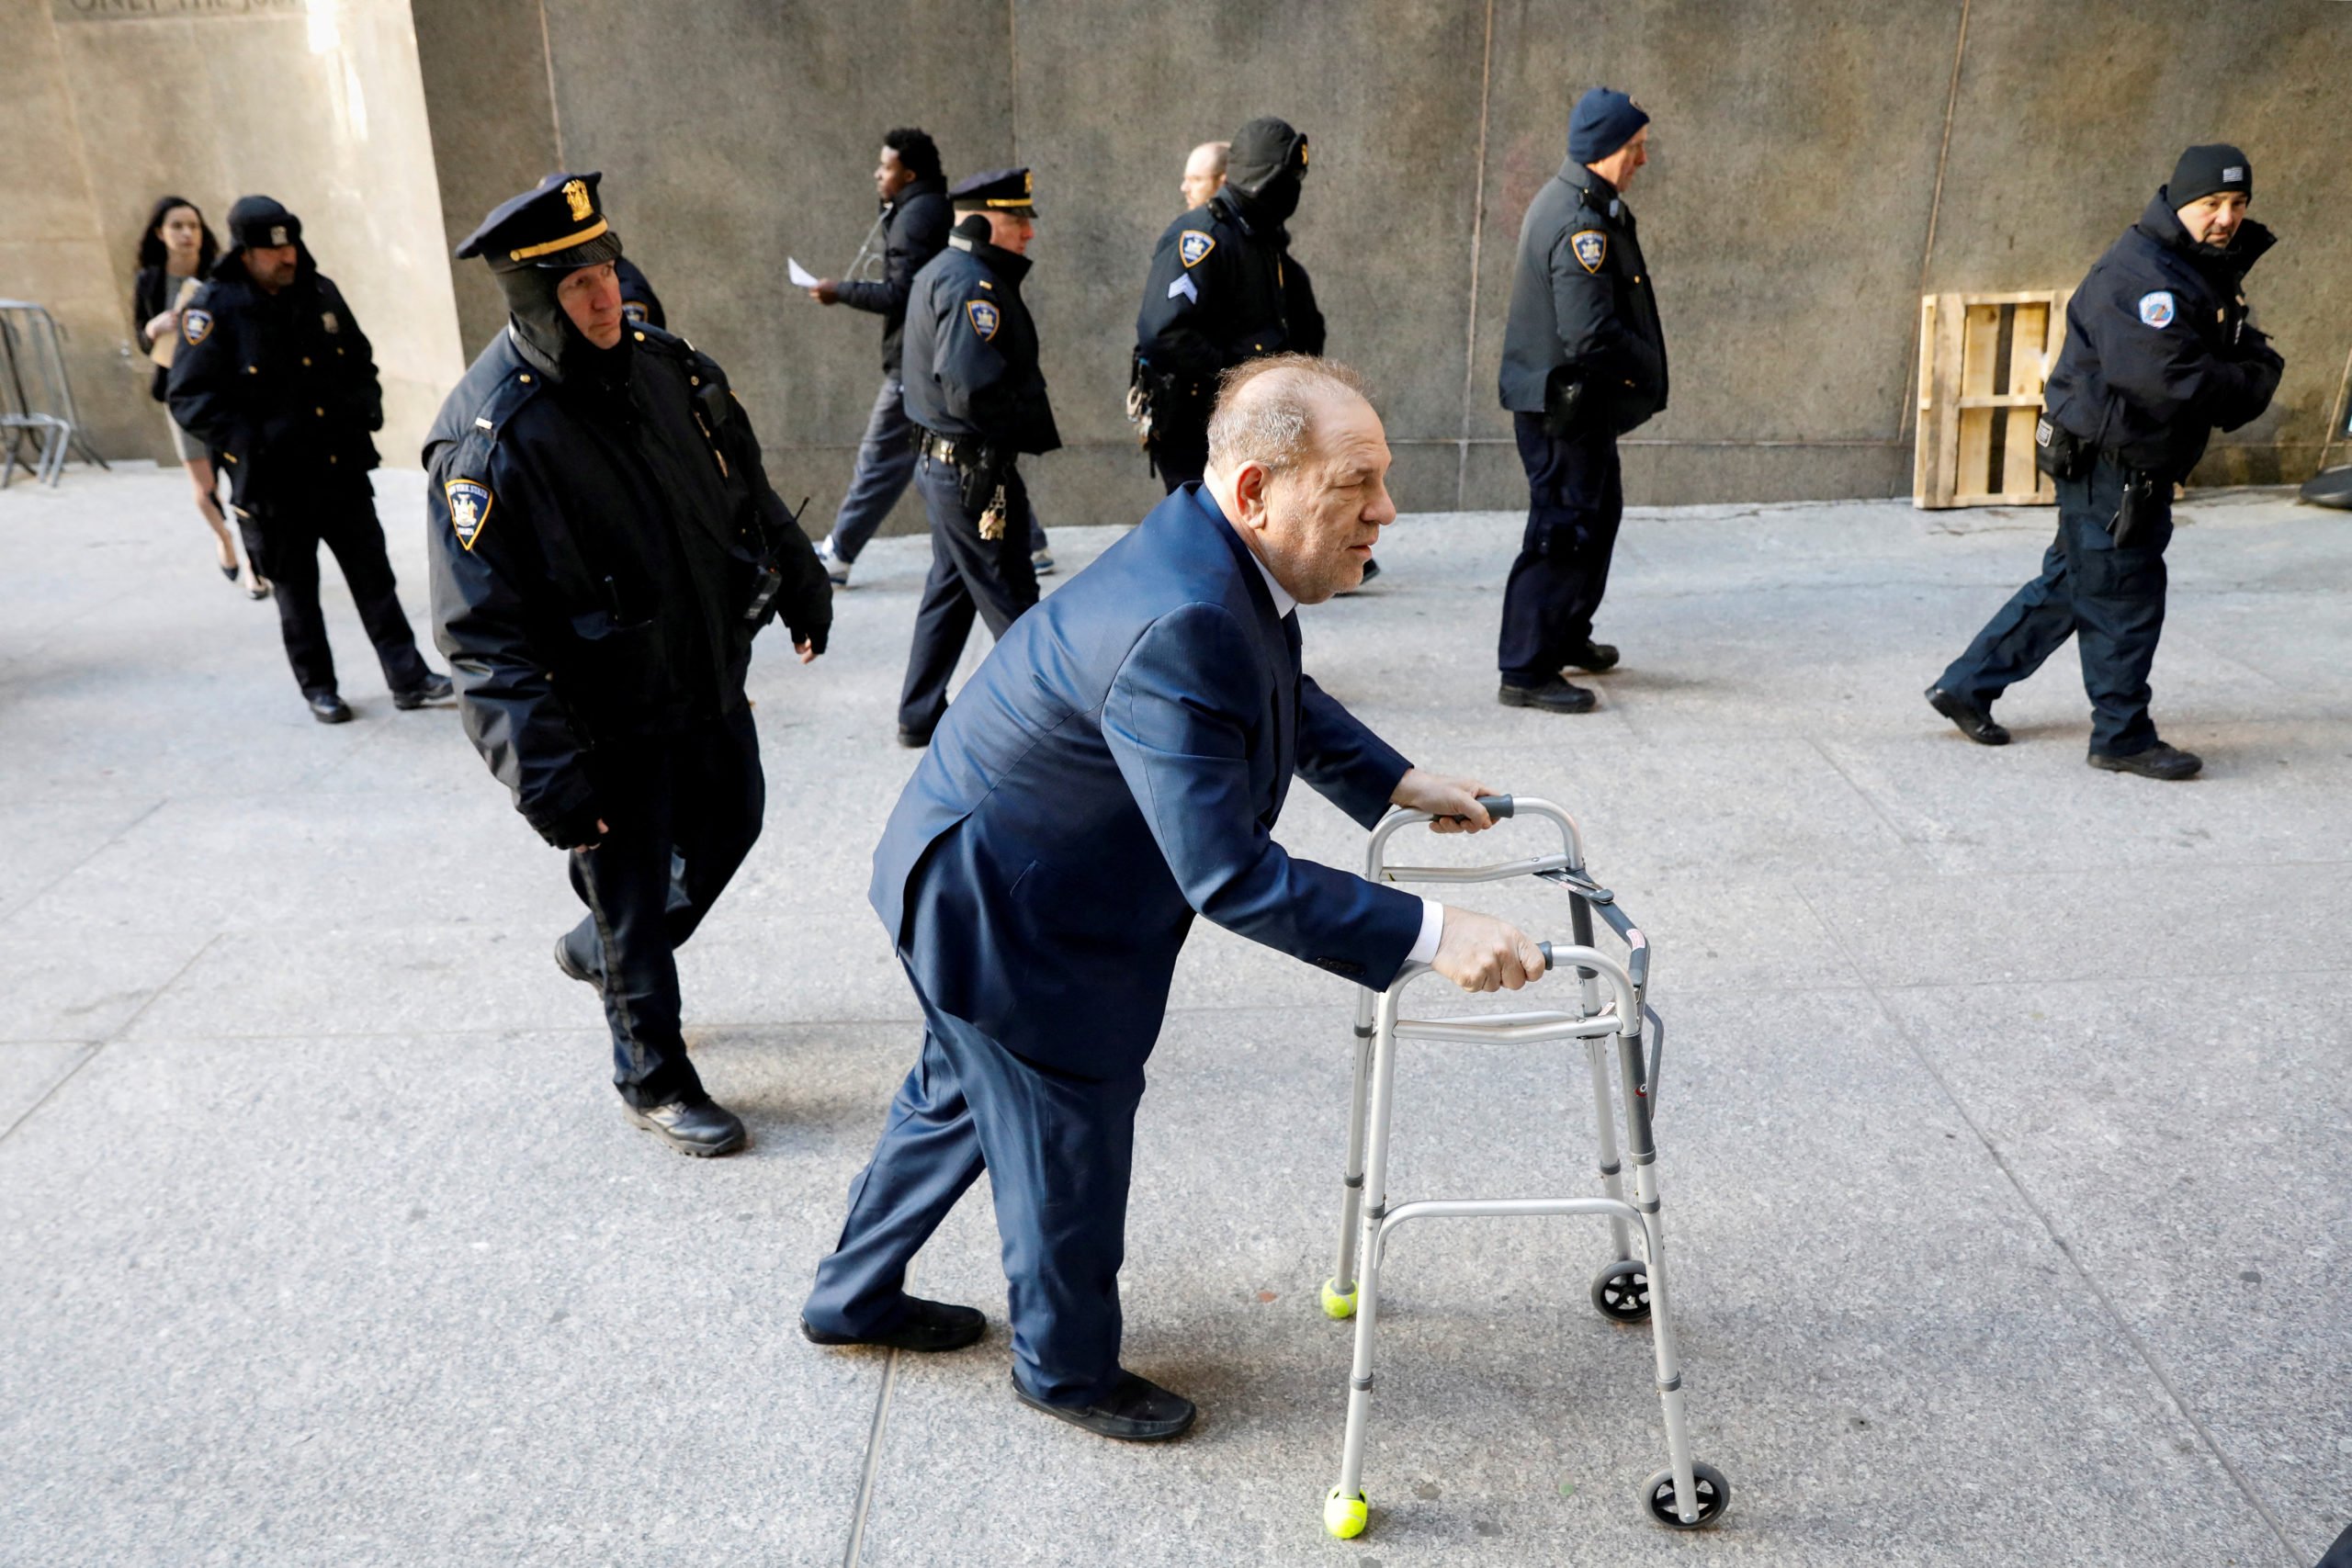 FILE PHOTO: Film producer Harvey Weinstein arrives at New York Criminal Court for his sexual assault trial in the Manhattan borough of New York City, New York, U.S., January 9, 2020. REUTERS/Brendan McDermid/File Photo/File Photo